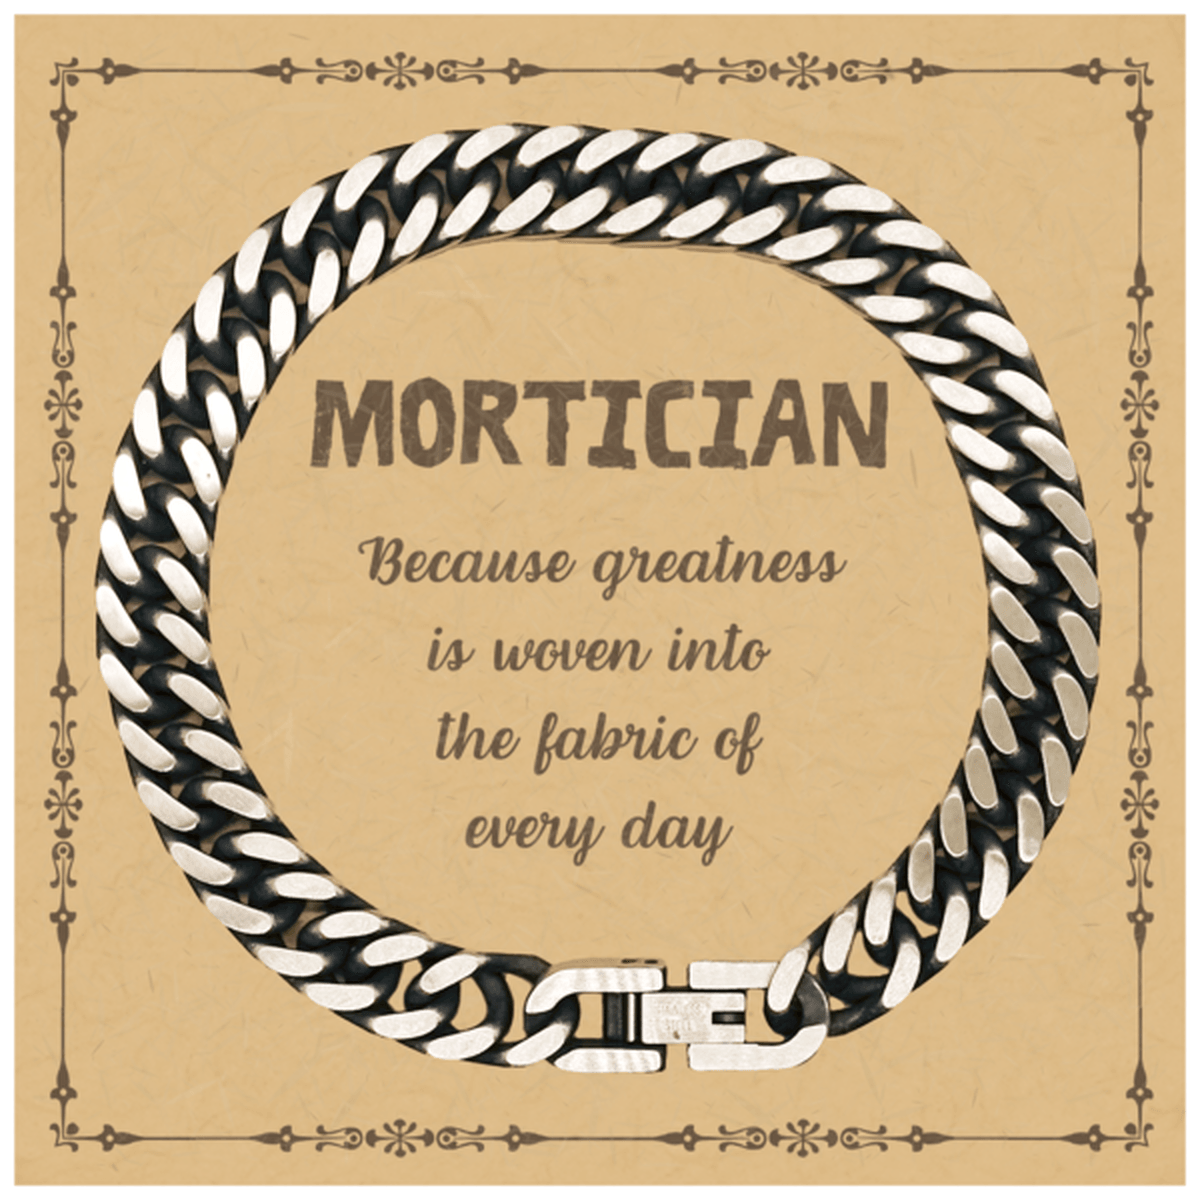 Sarcastic Mortician Cuban Link Chain Bracelet Gifts, Christmas Holiday Gifts for Mortician Birthday Message Card, Mortician: Because greatness is woven into the fabric of every day, Coworkers, Friends - Mallard Moon Gift Shop